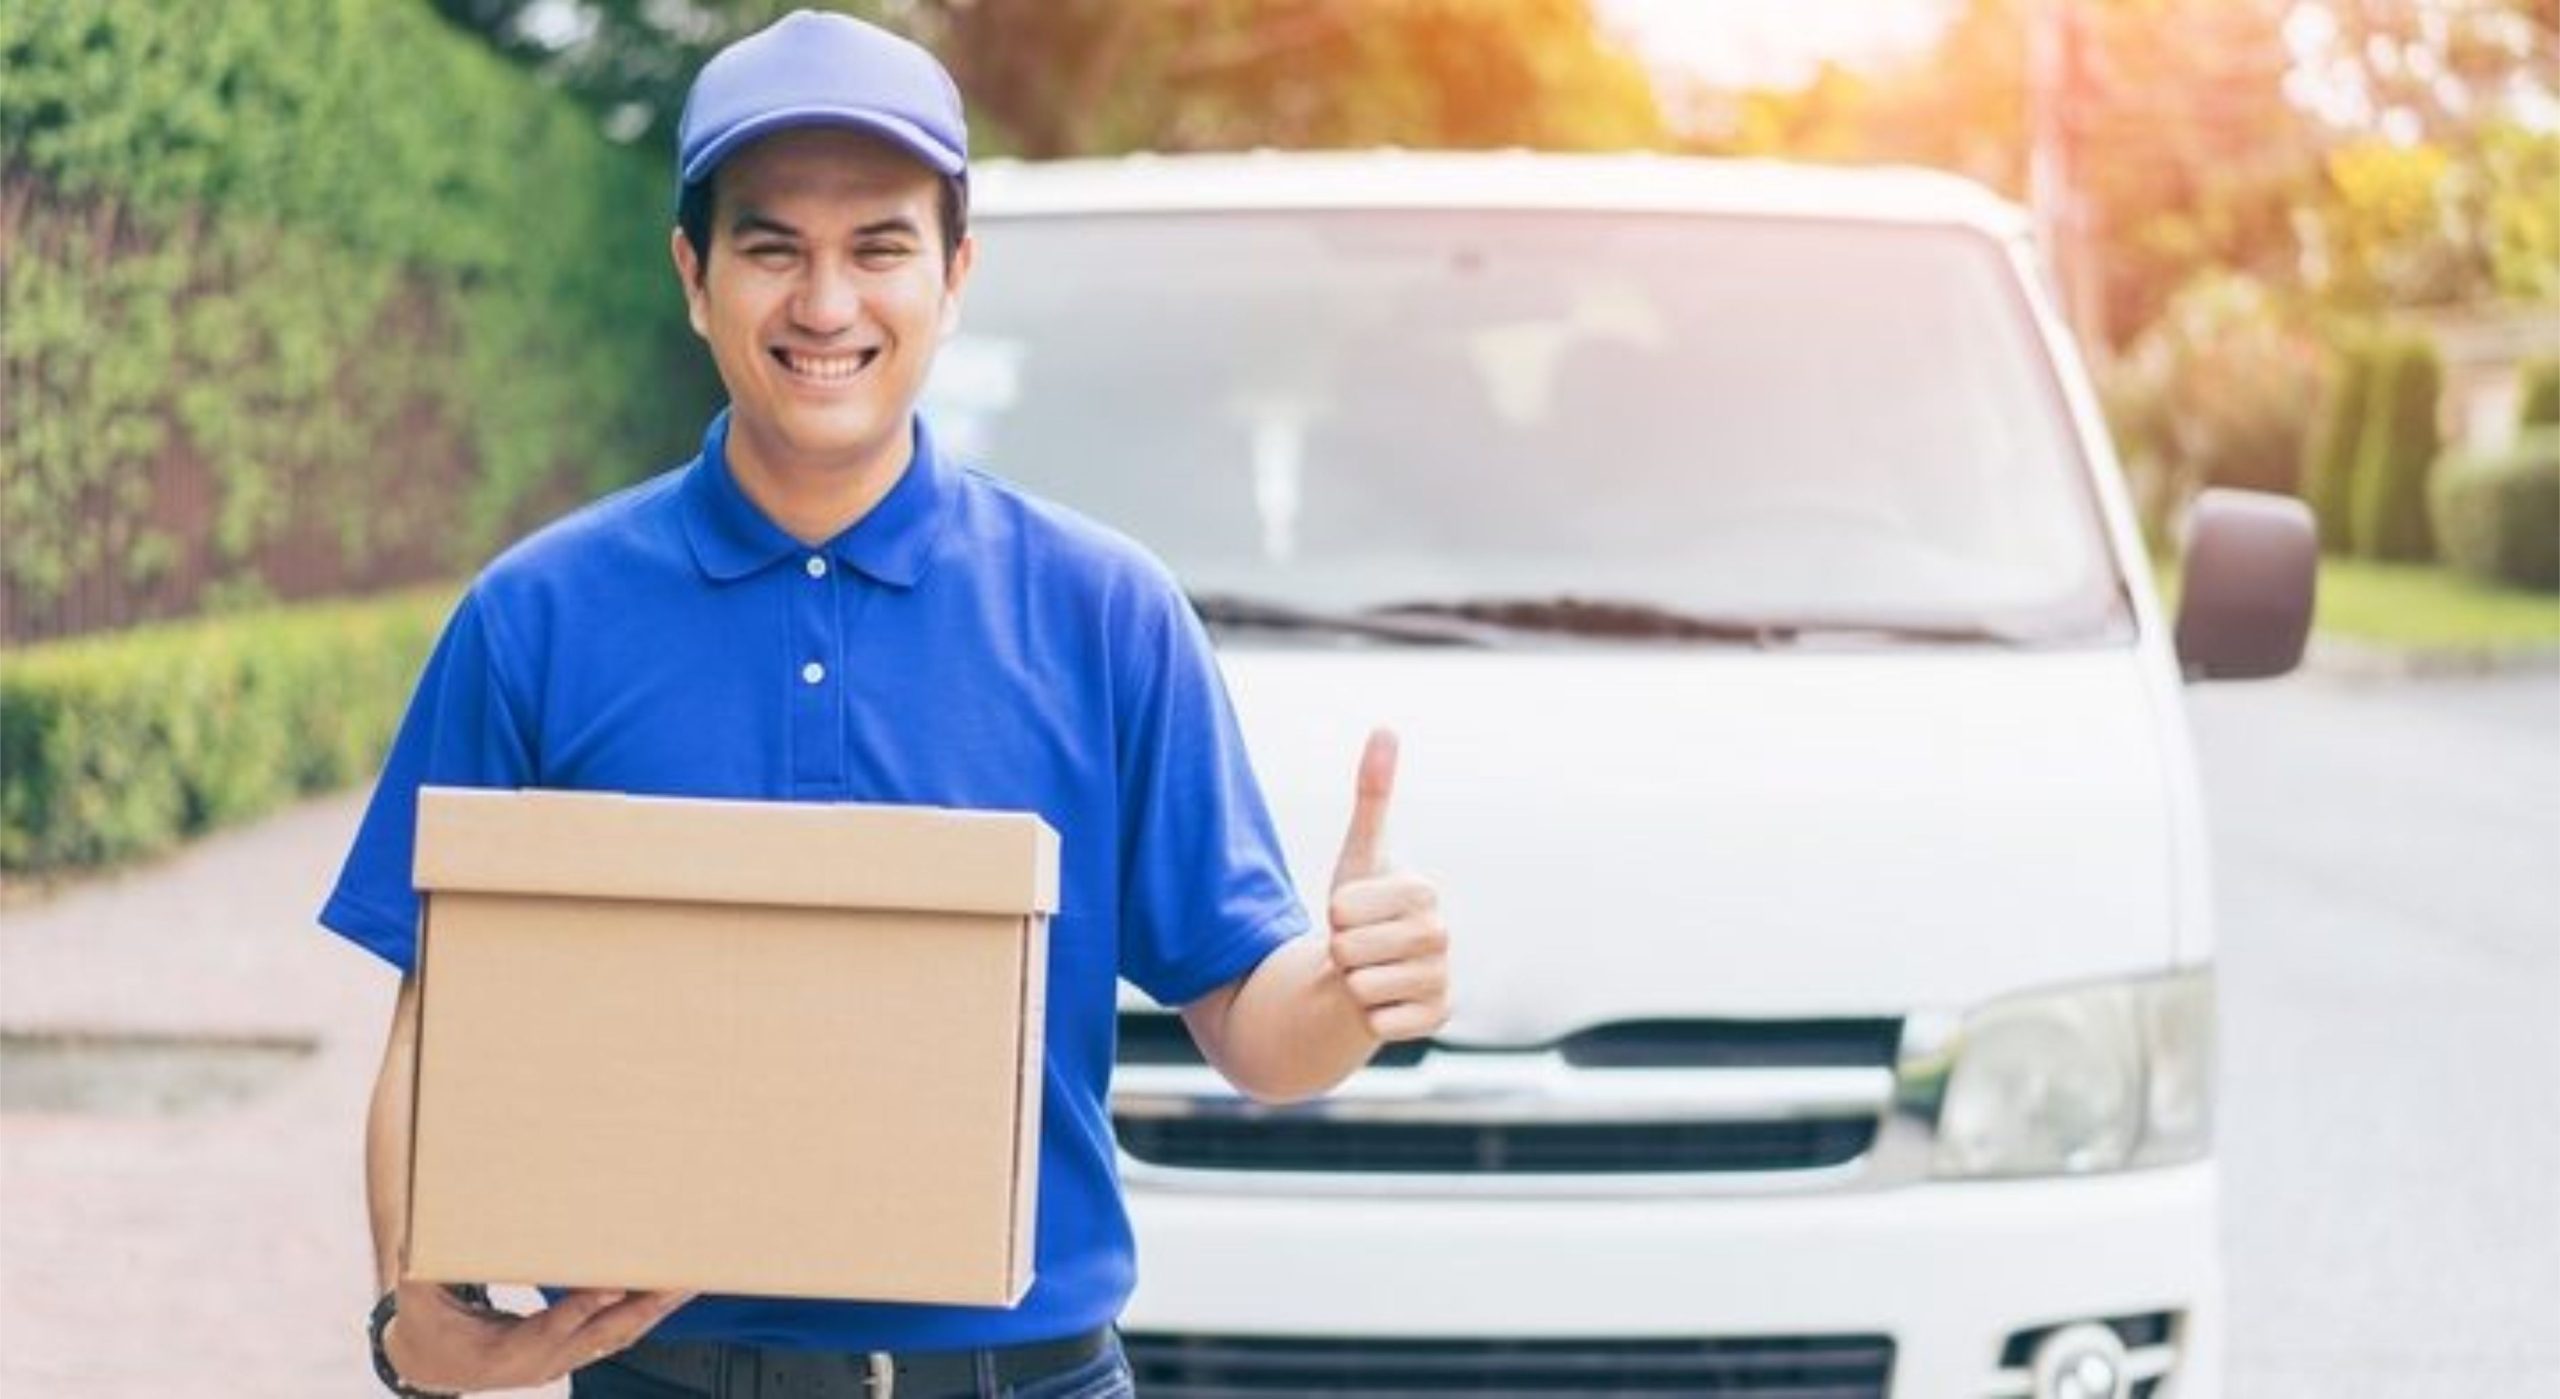 Apply today to work with delivery: over 10,000 positions